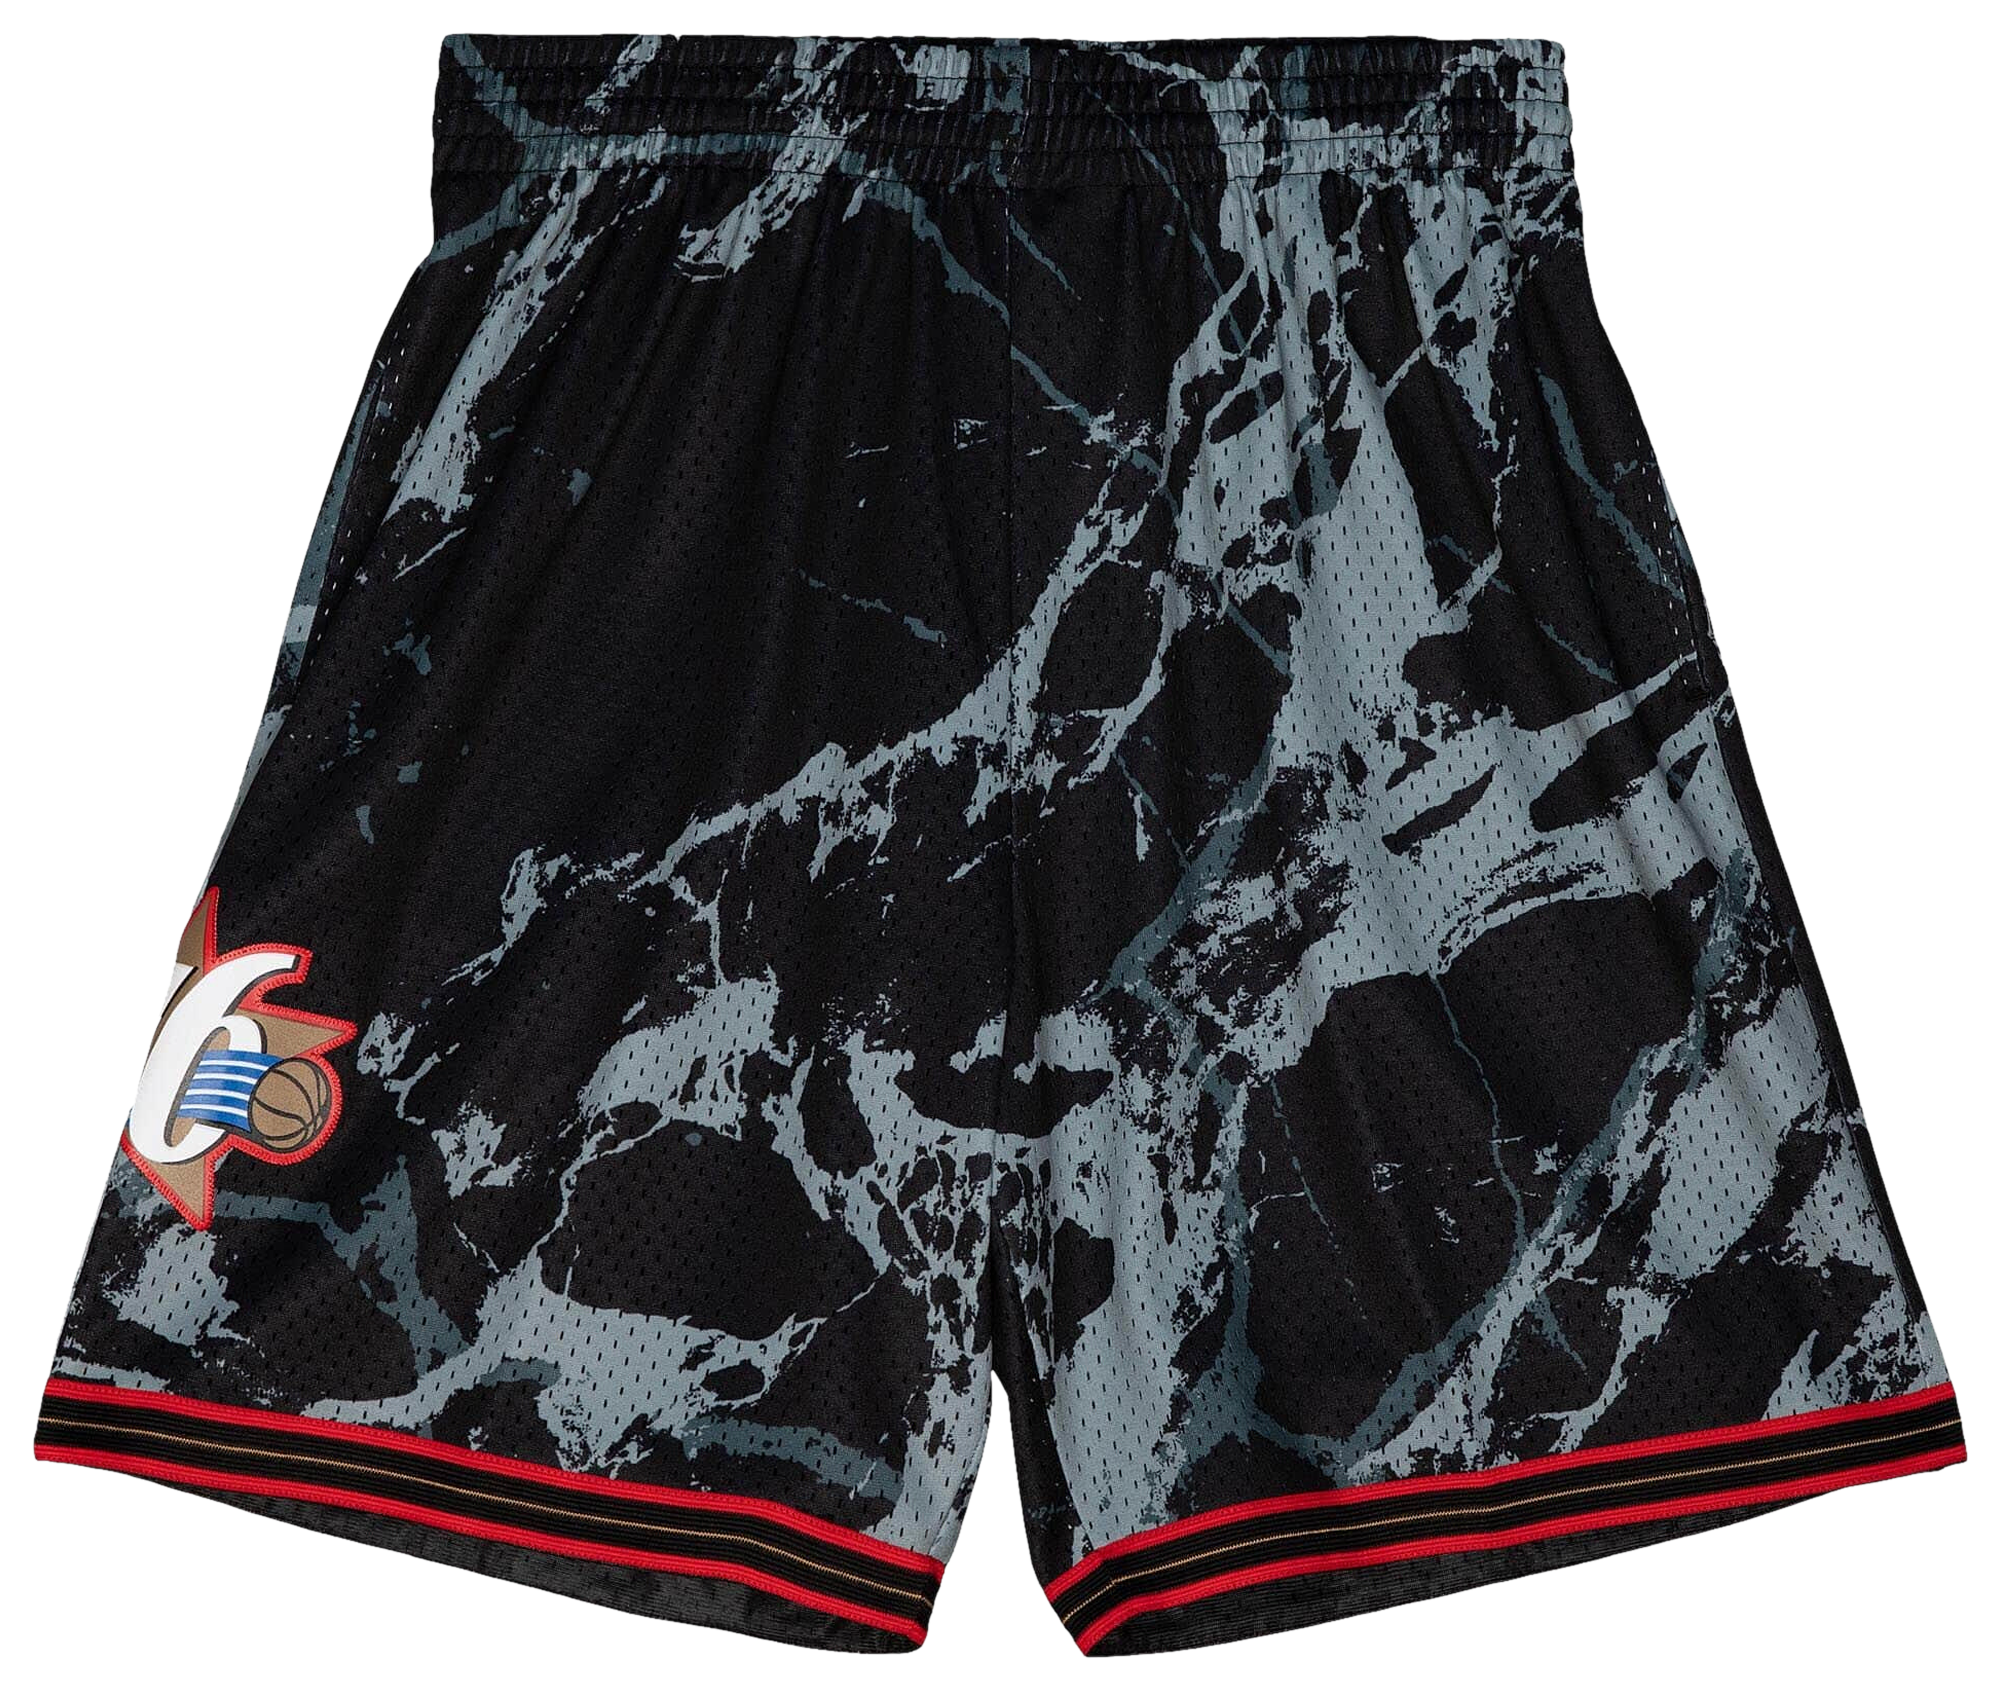 Mitchell & Ness 76ers Marble Short